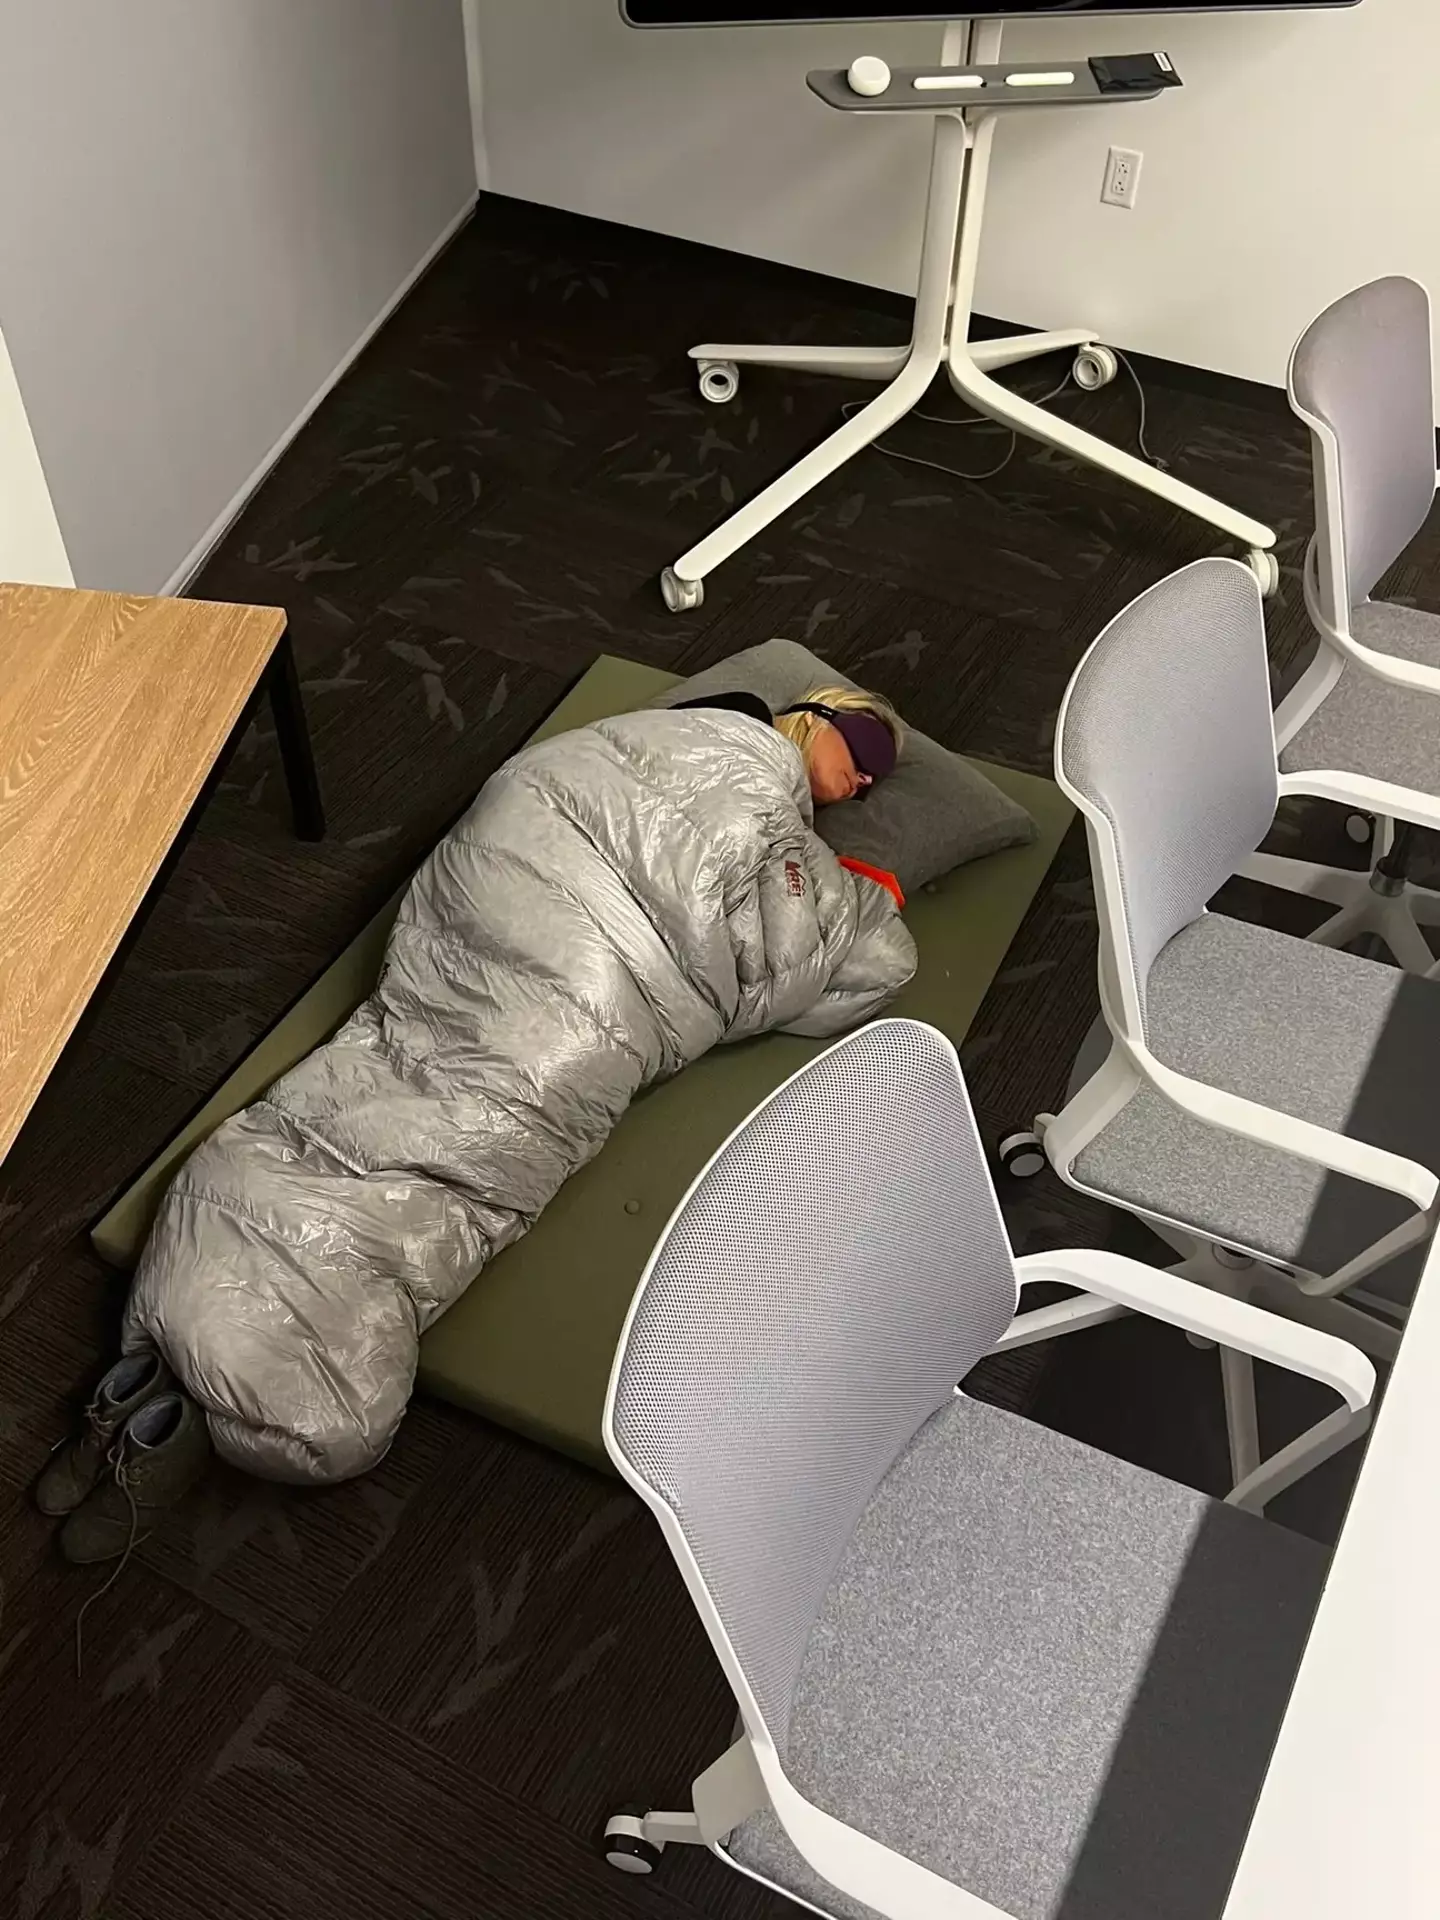 The Twitter employee who went viral for sleeping on the office floor has now been laid off.